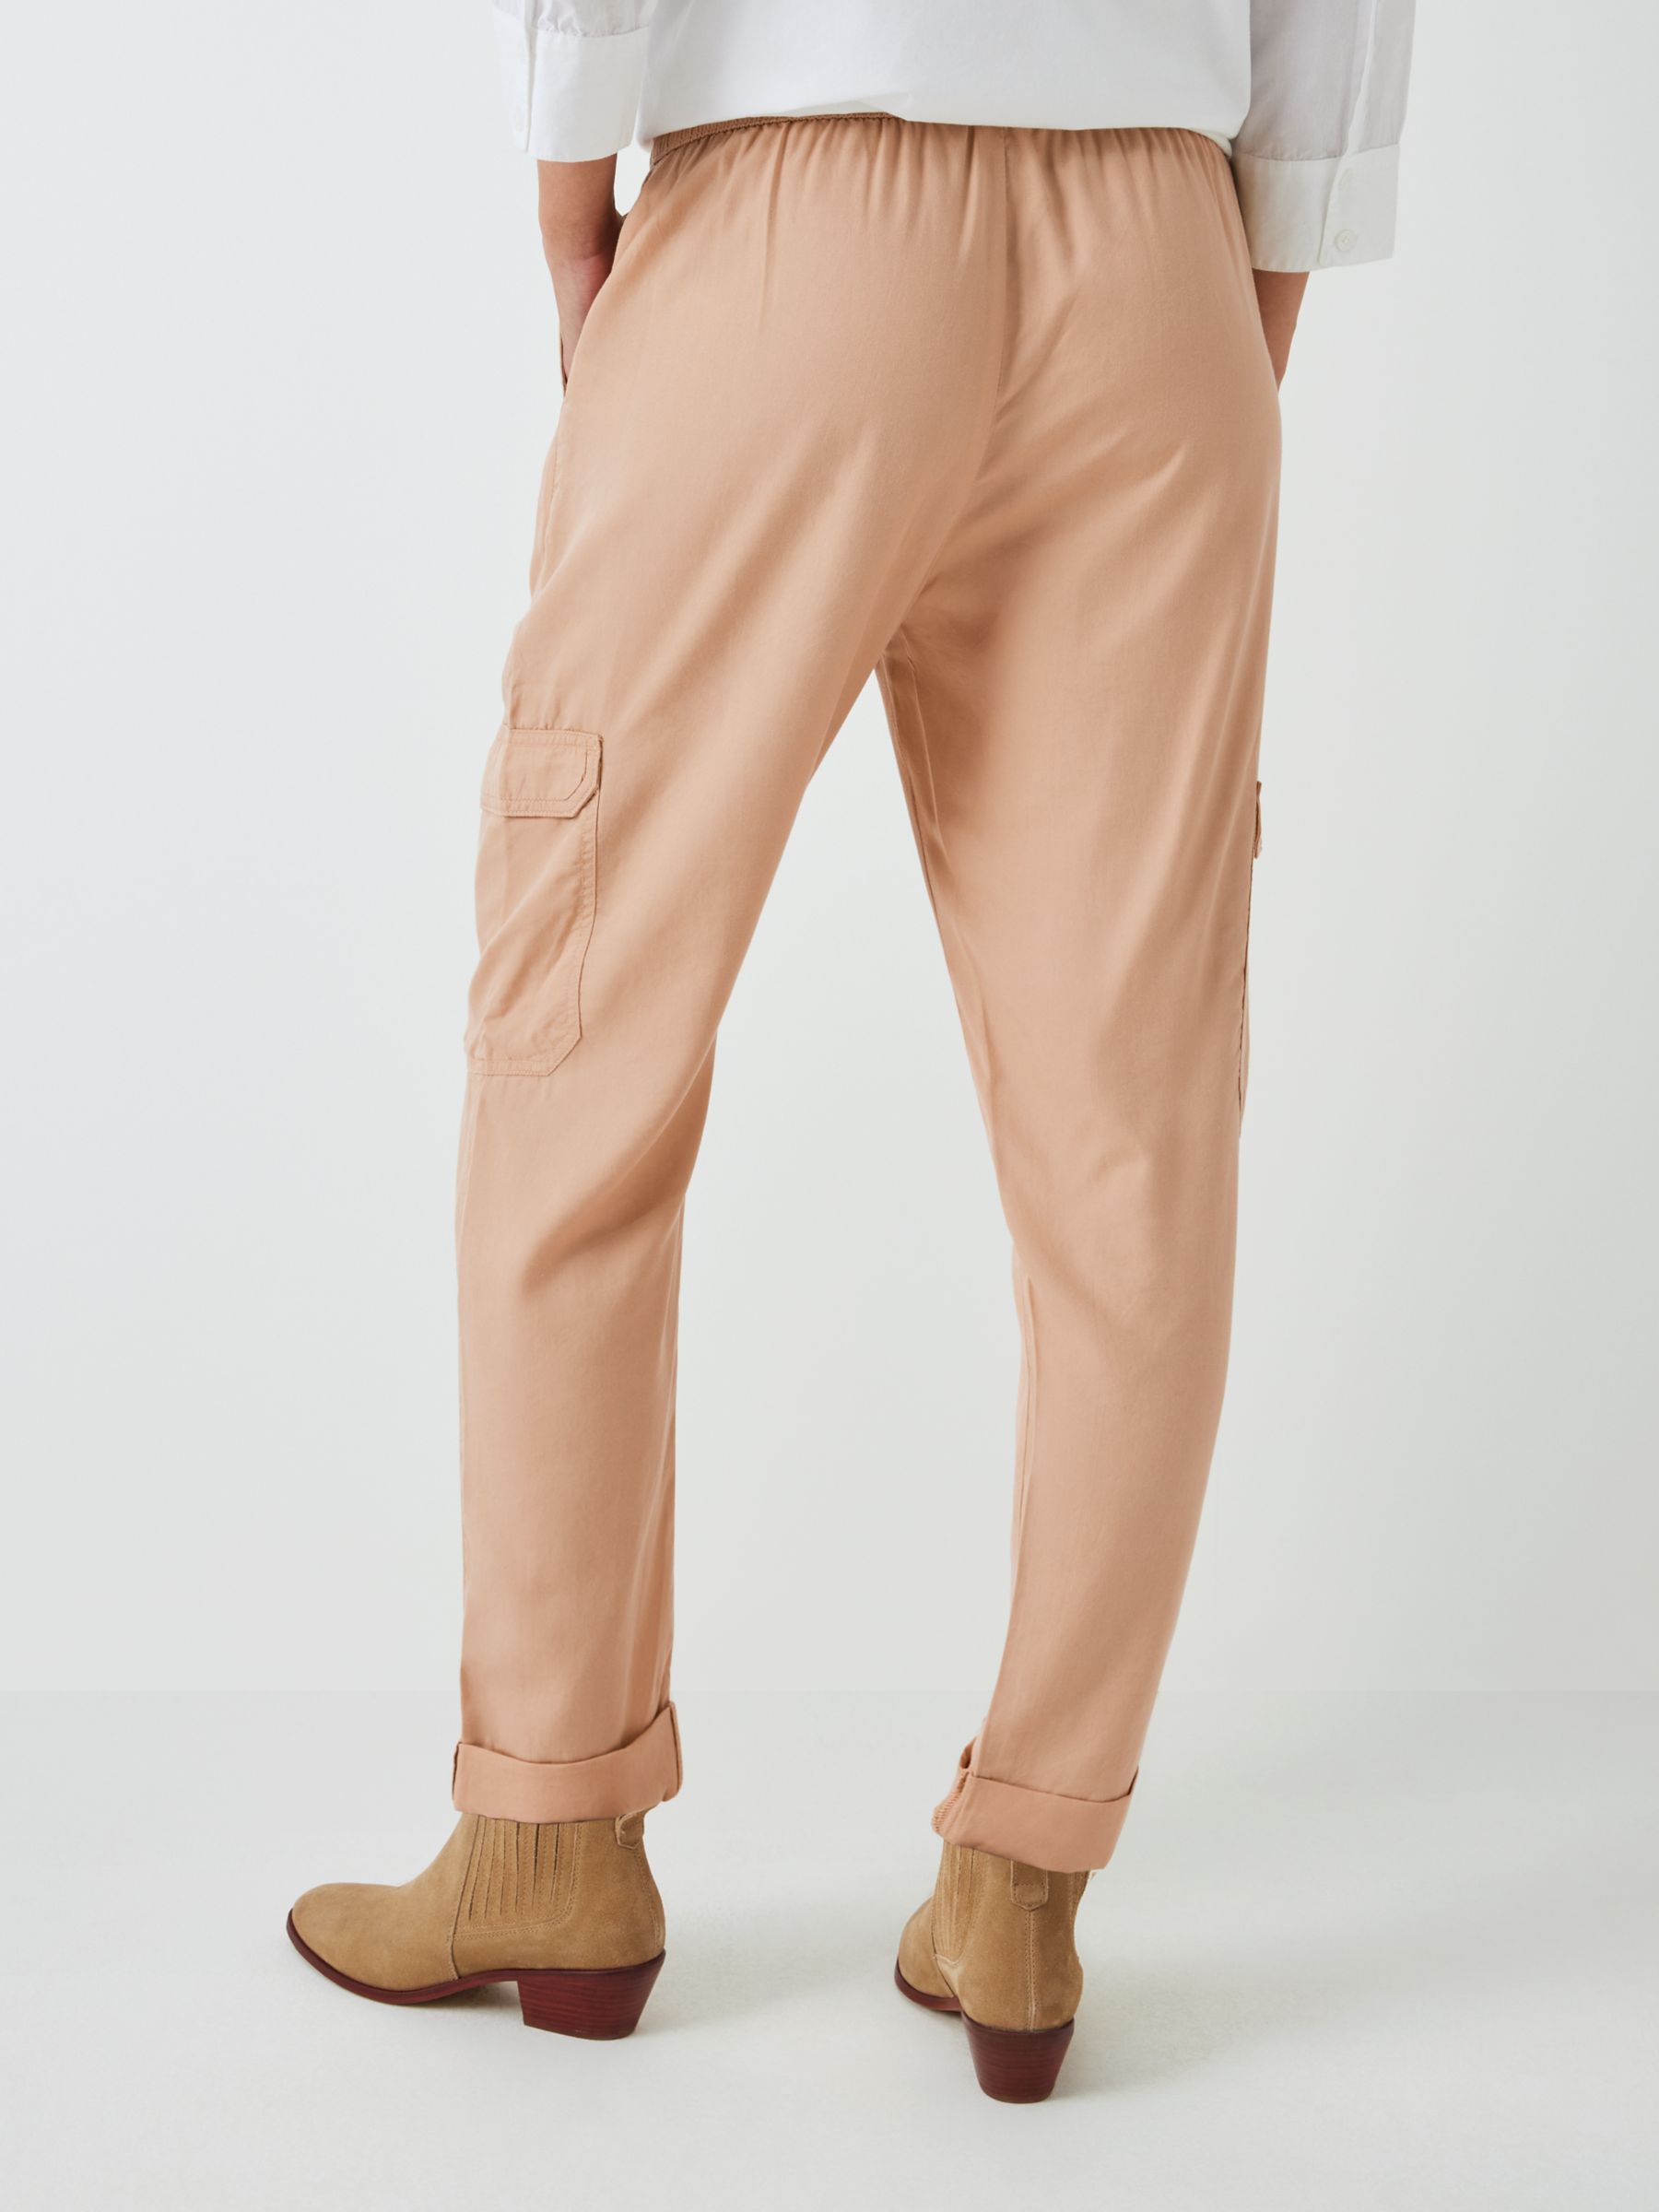 John Lewis ANYDAY Turnup Cargo Trousers, Stone, 6